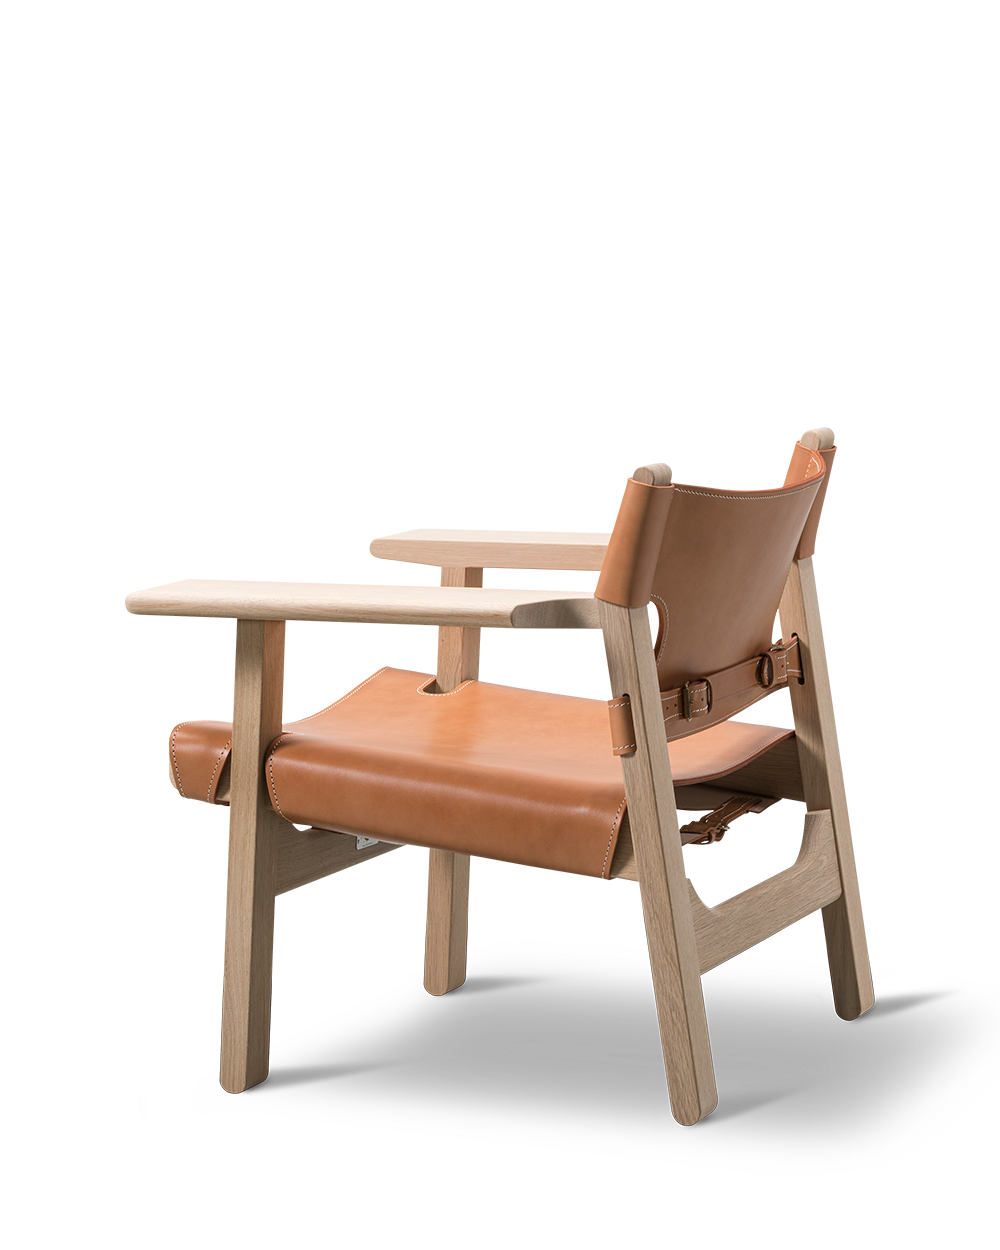 Fredericia The Spanish Chair - Natural Leather - a sustainably designed chair with an oak wooden frame and vegetable leather seating - Enter The Loft